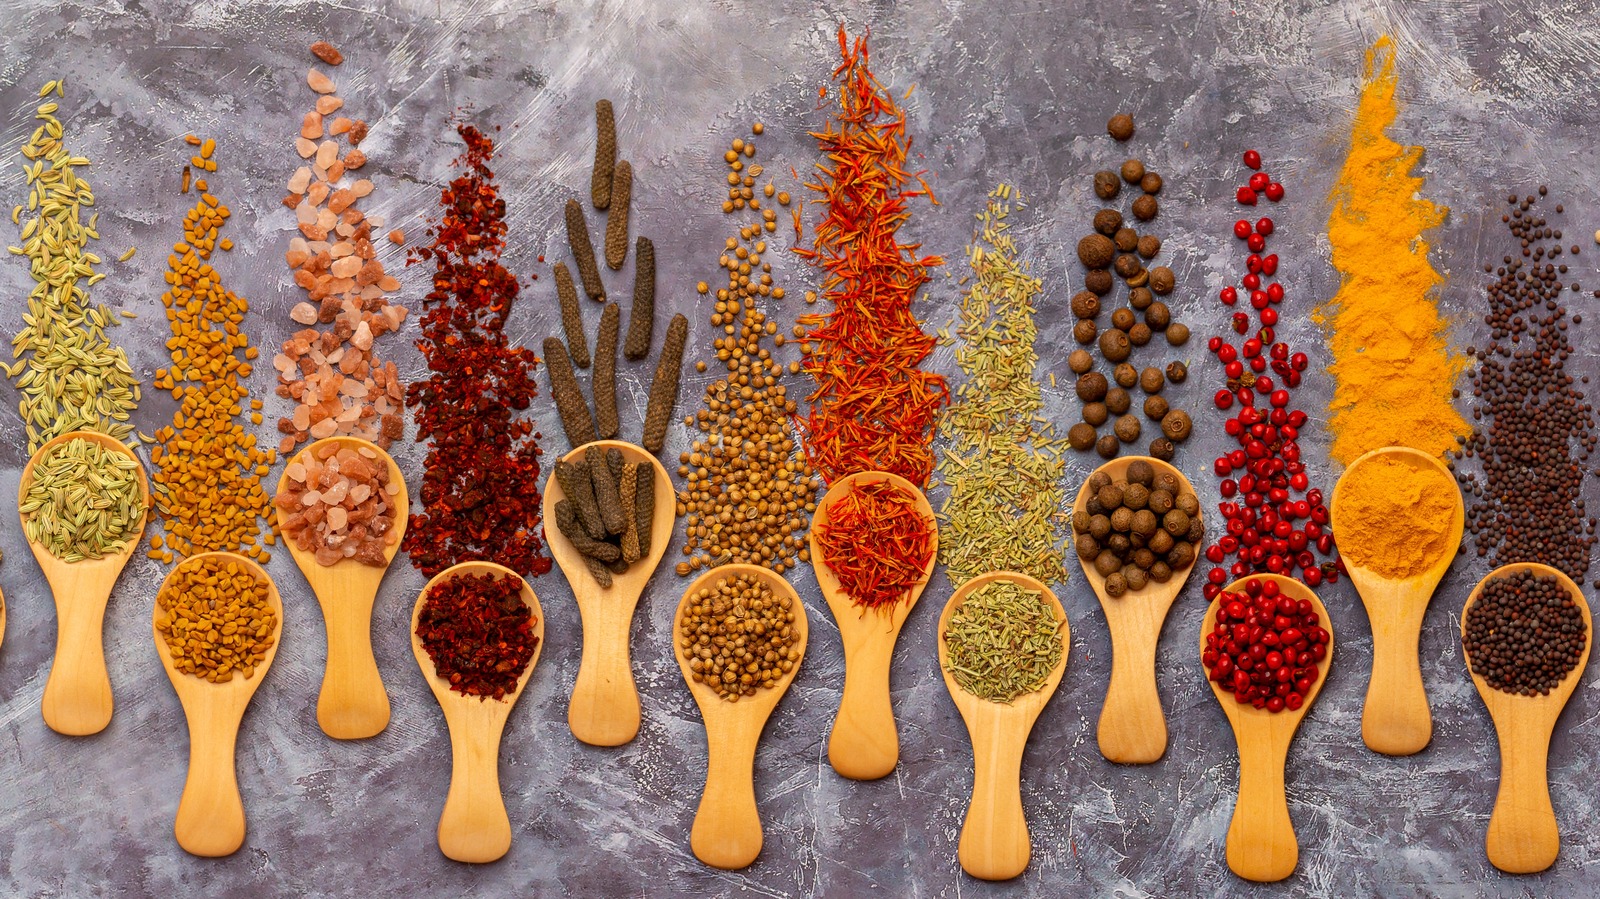 https://www.thedailymeal.com/img/gallery/the-simple-reason-your-spice-jars-are-clumped-up/l-intro-1682460468.jpg